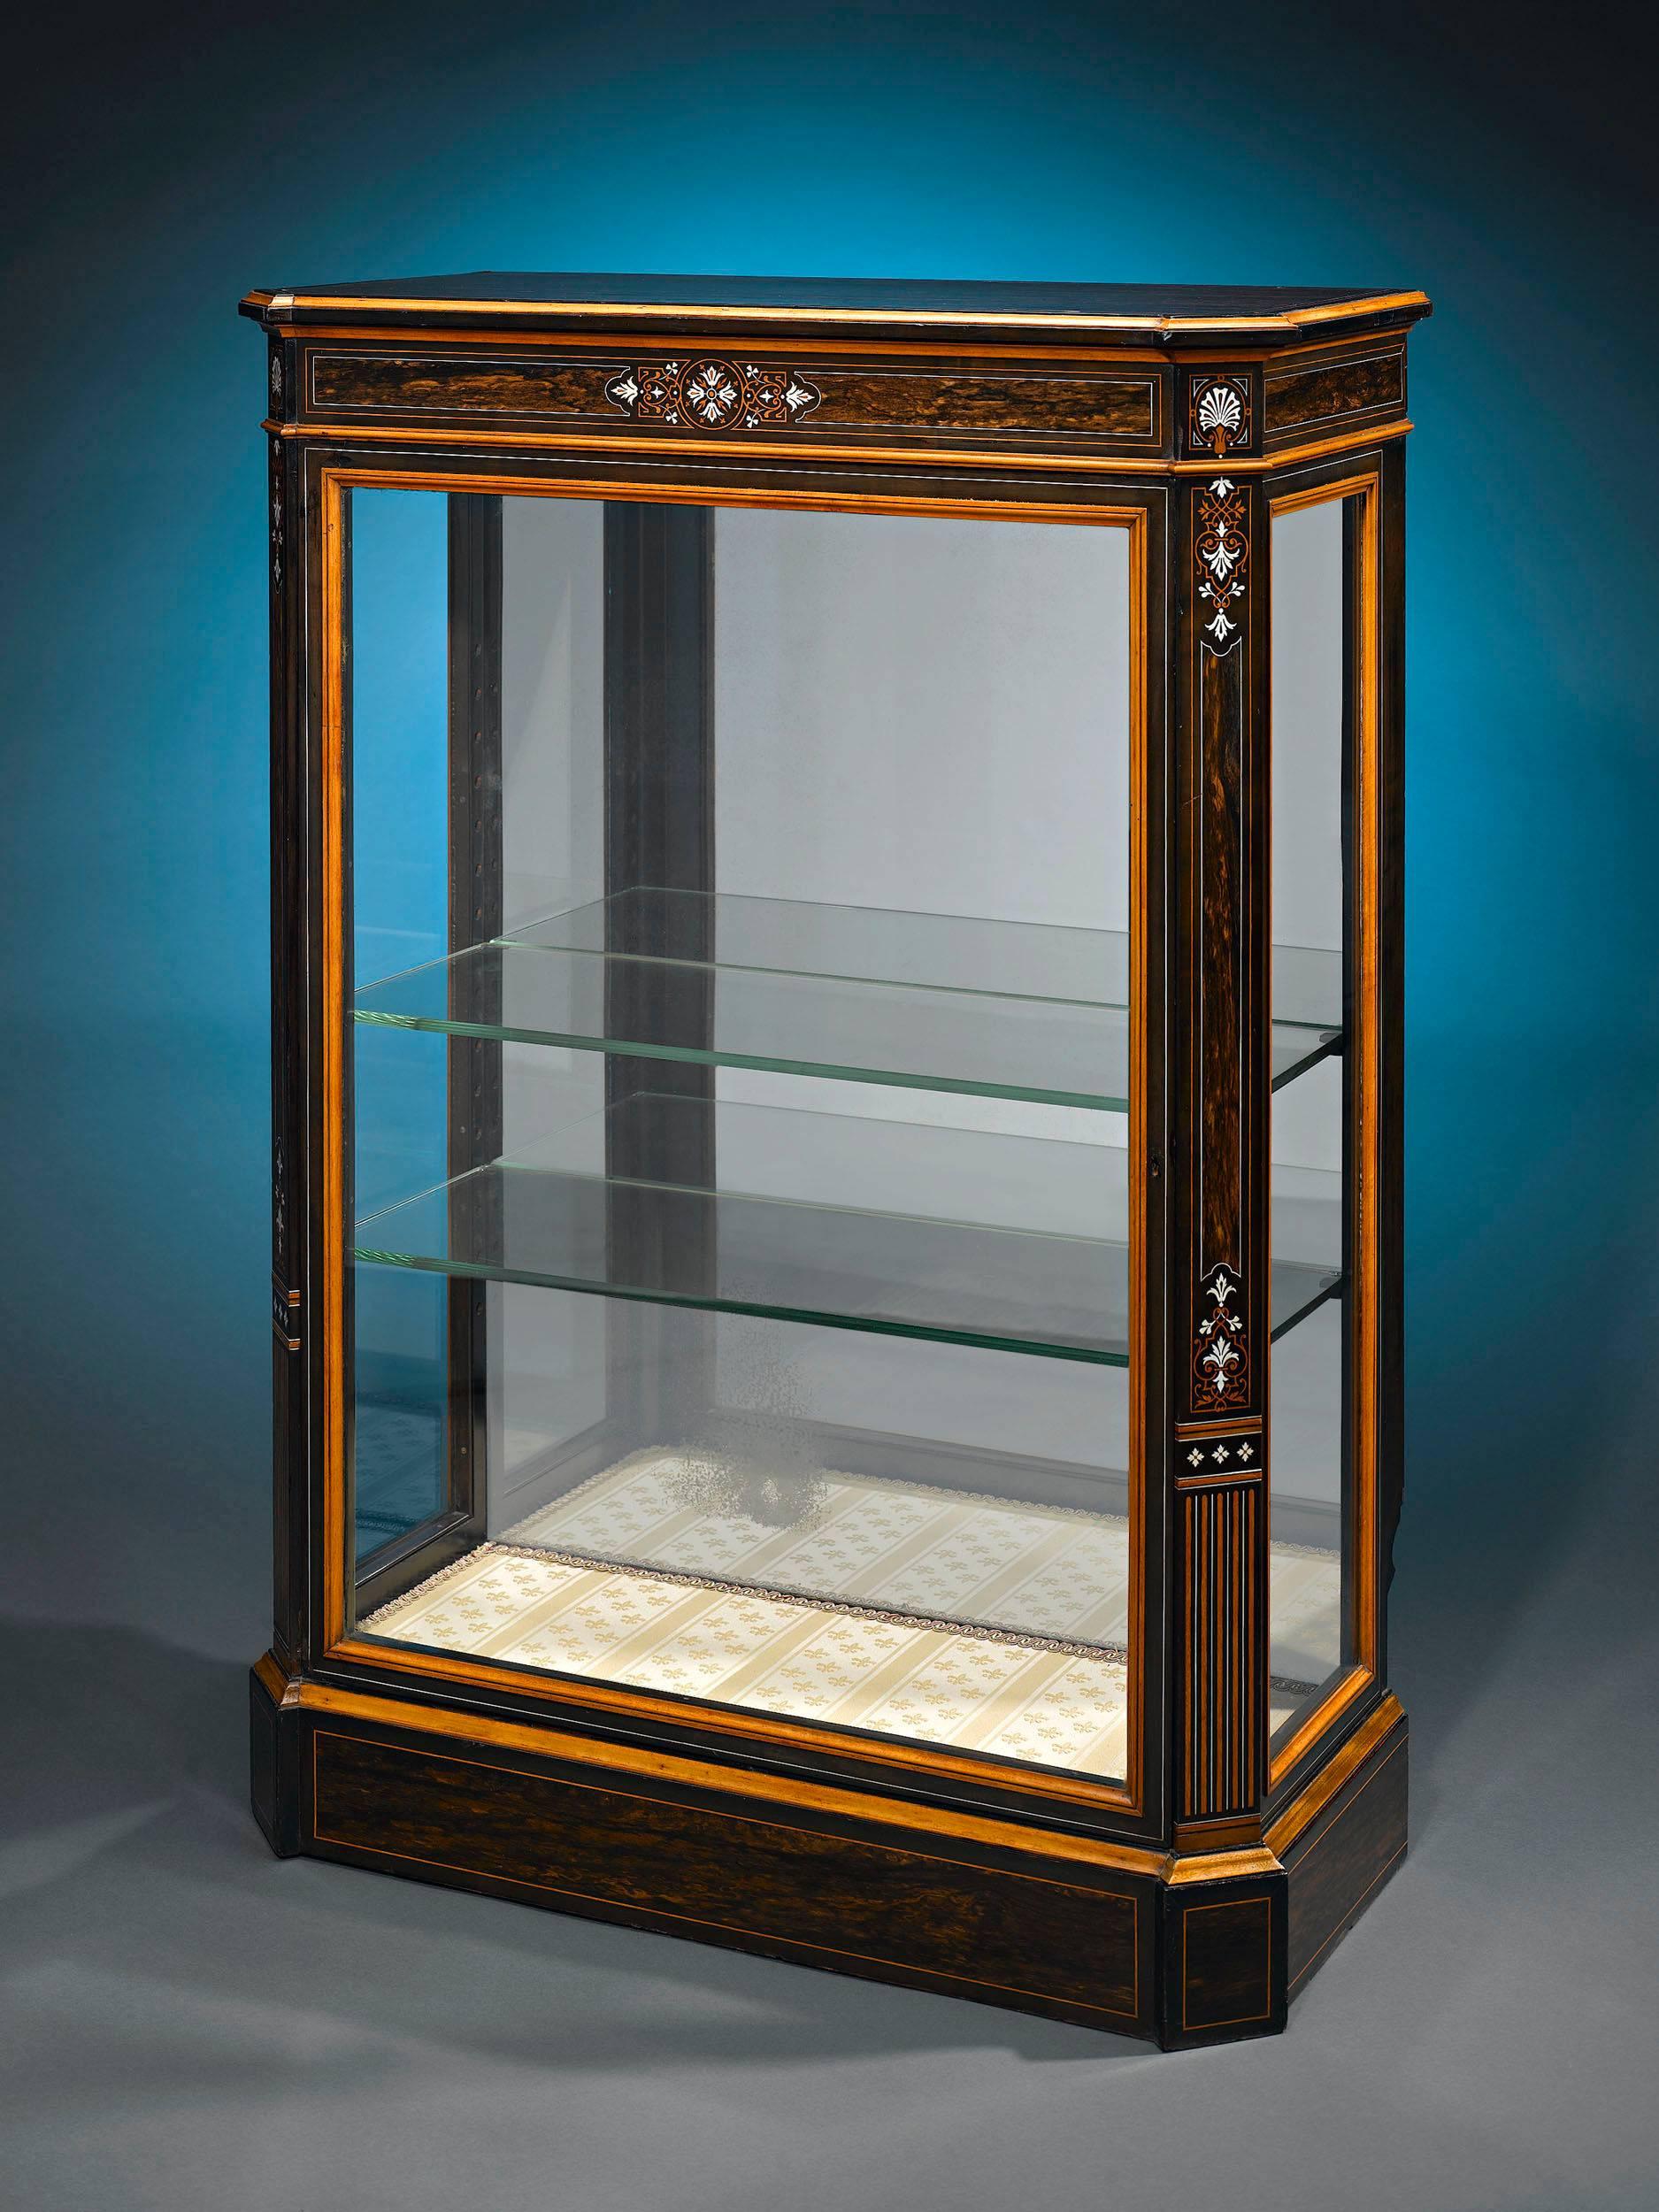 Highly-prized coromandel, or East Indian ebony, was used to create this beautiful Victorian vitrine. Featuring delicate inlay in the Victorian/Edwardian style and glass panels framed in the equally luxurious satinwood, this cabinet is constructed to